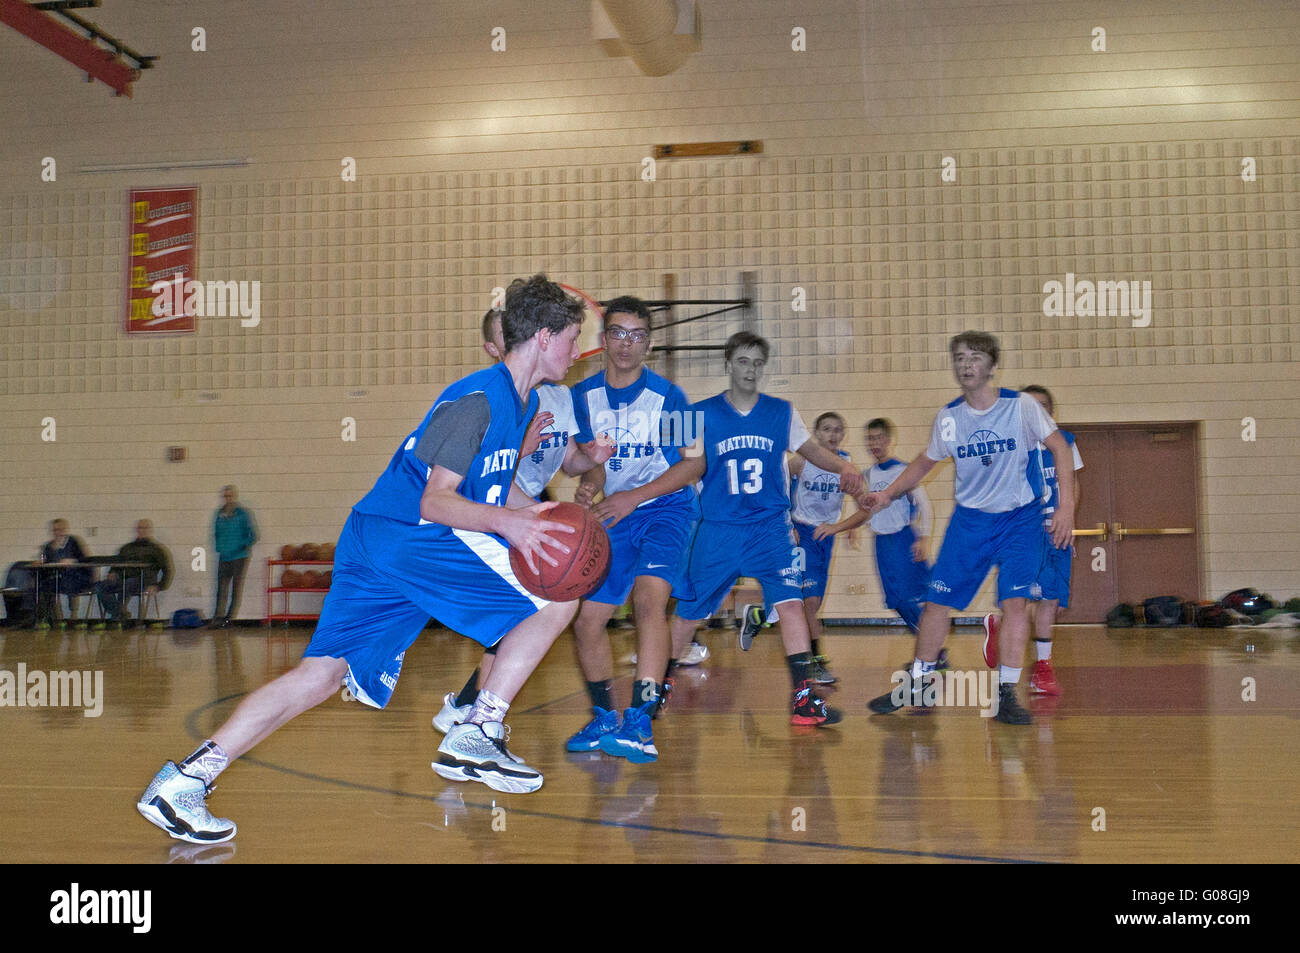 Young teenage boy age 13 dribbles basketball for Nativity Catholic School during a conference game. St Paul Minnesota MN USA Stock Photo